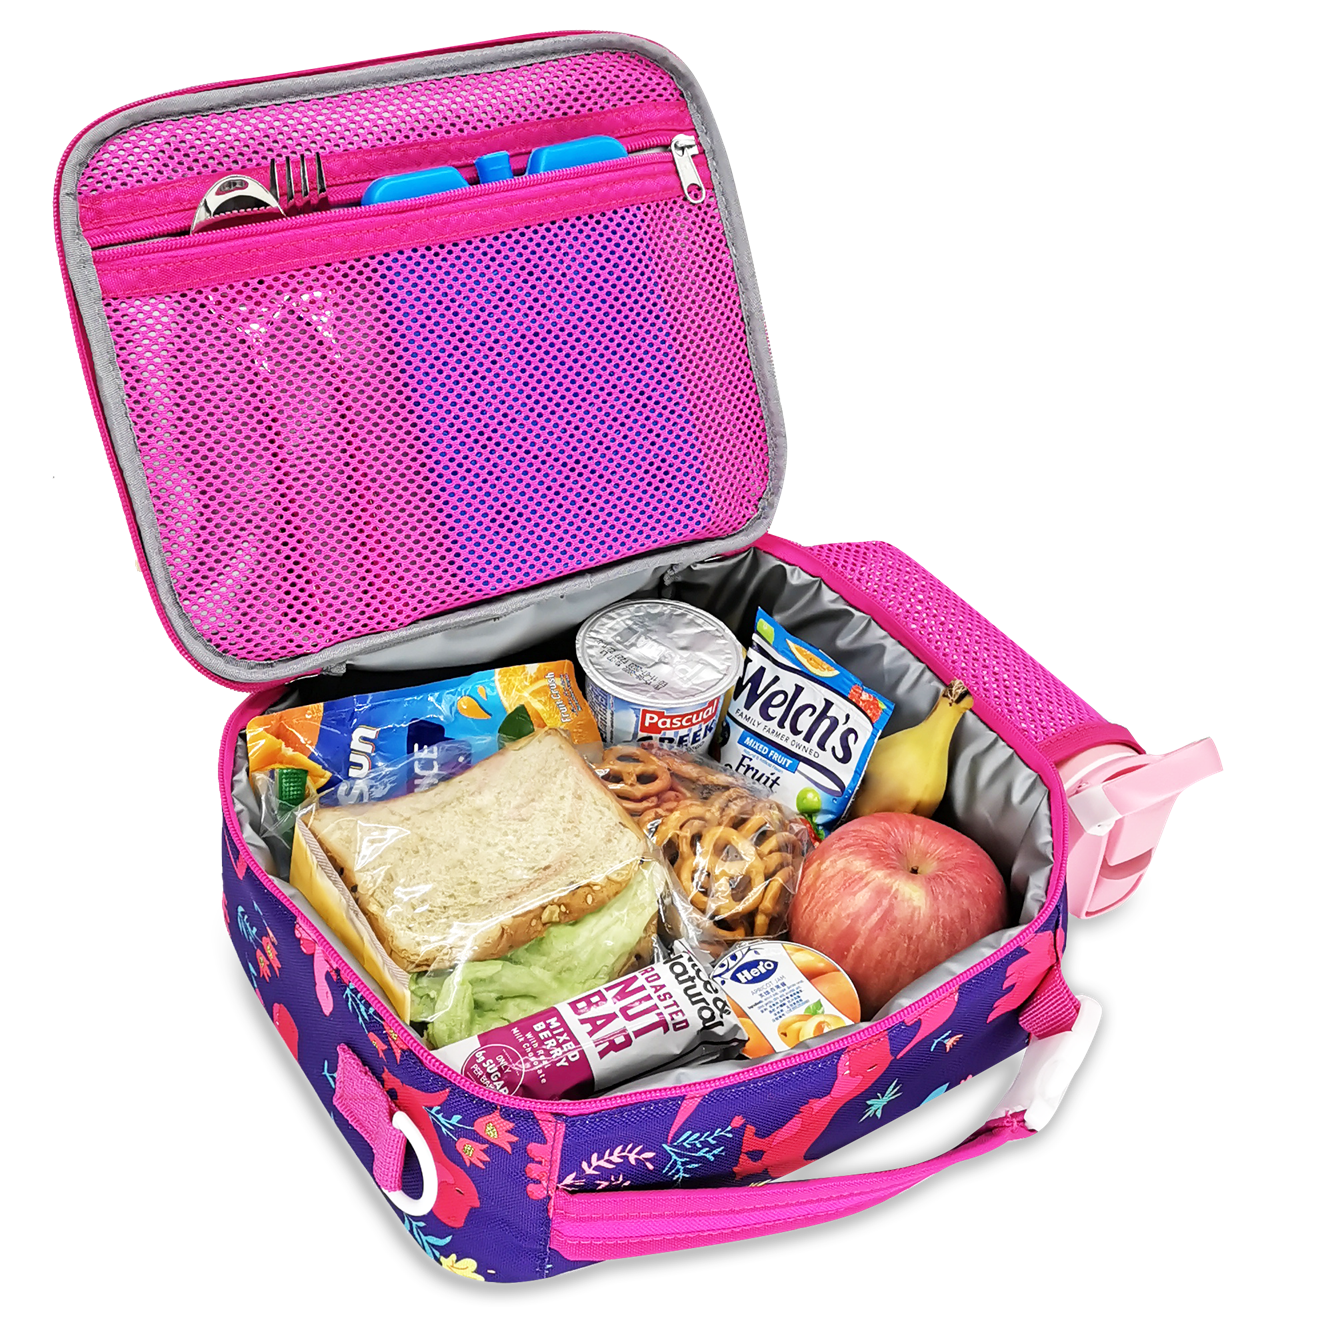 Kids Pu Laser Mermaid Lunch Box With Insulated Soft Bag, Mini Fridge And  School Water Bottle Holder, Cute Small Lunch Tote, Soft & Compact Cooler Bag  For School Picnic, Reusable Lunchbox